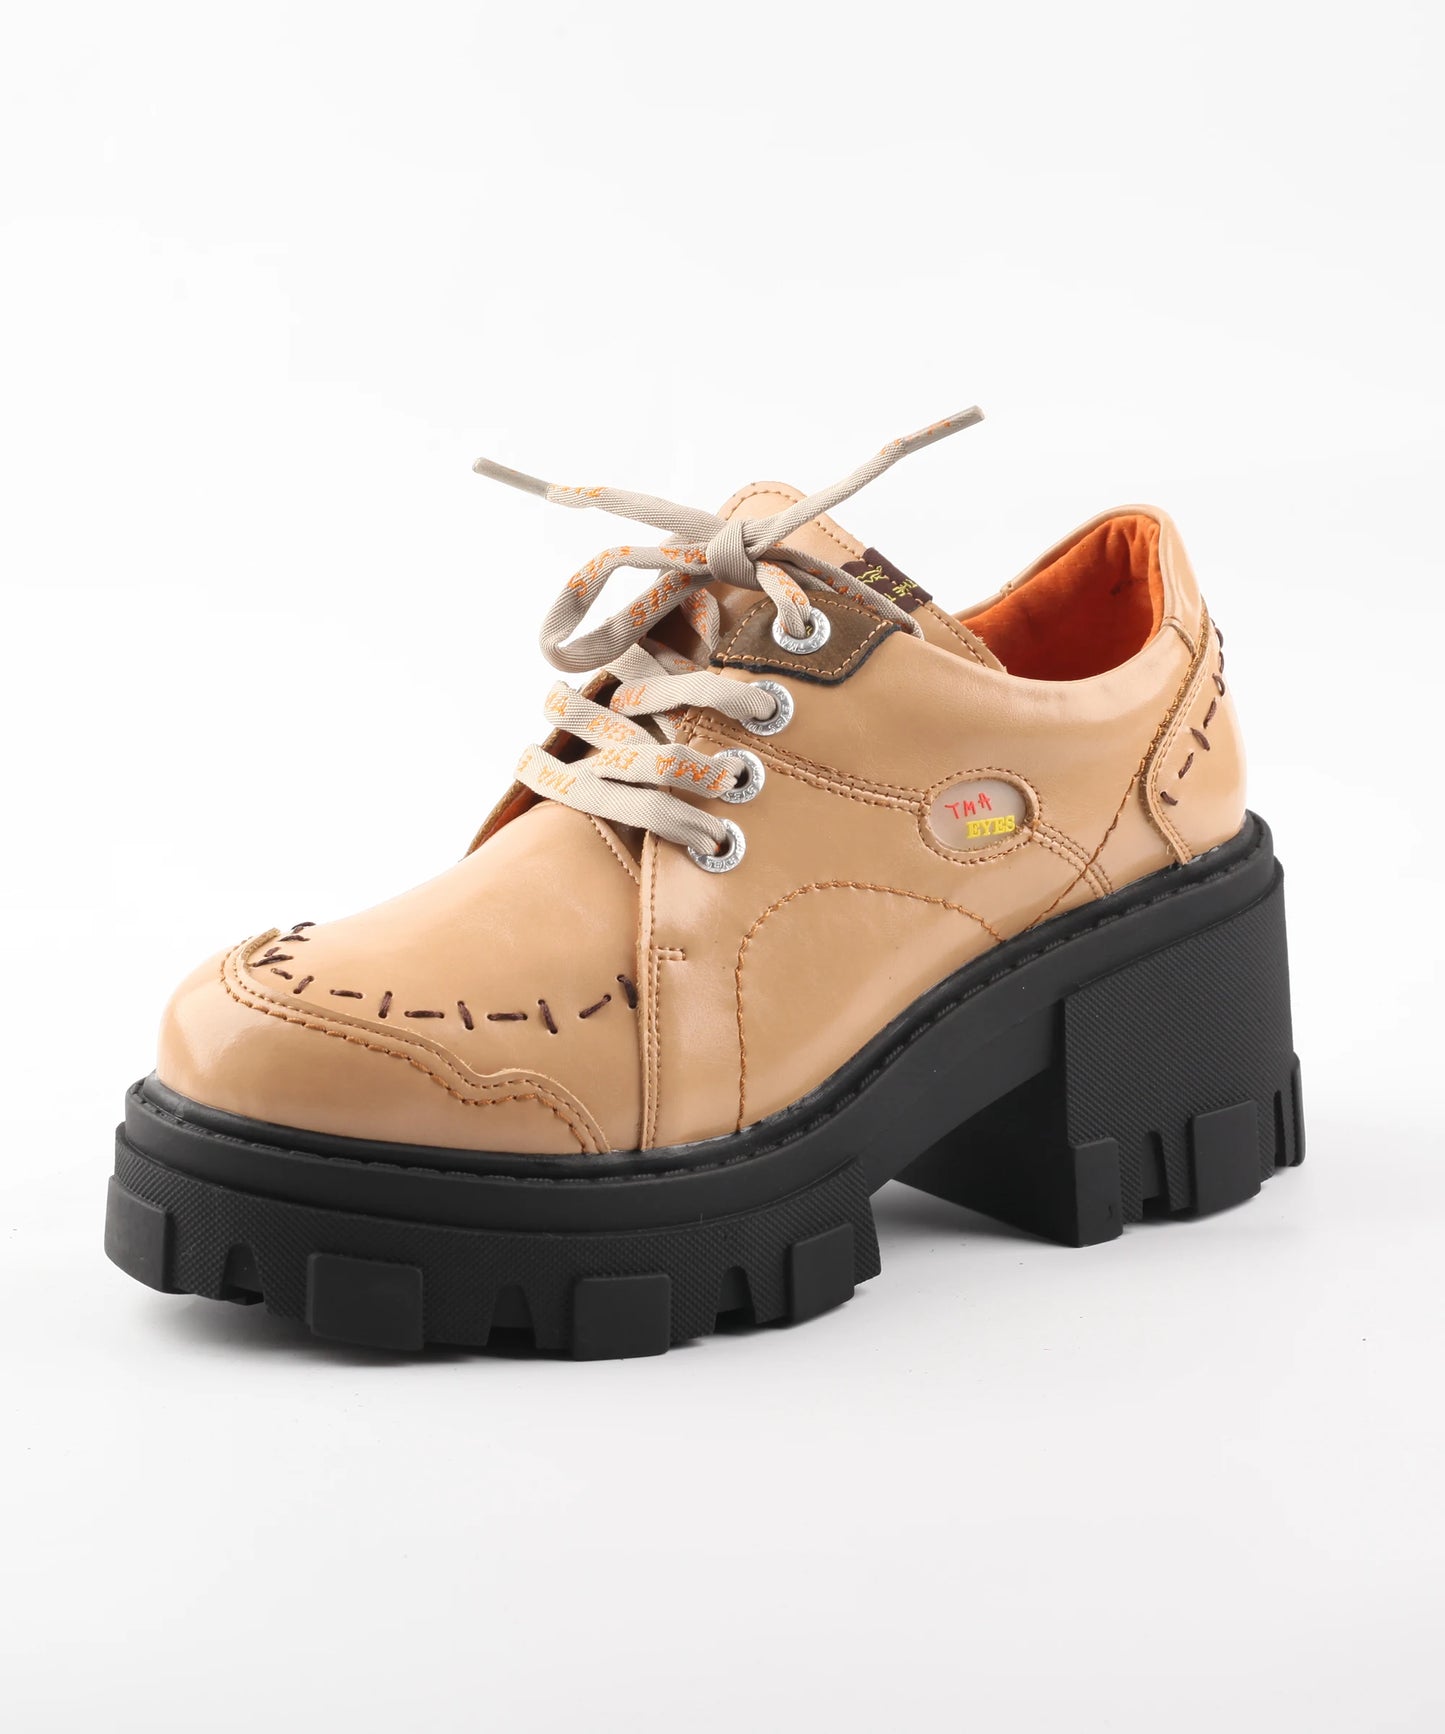 Leather Shoes for Women, Light Sole, High